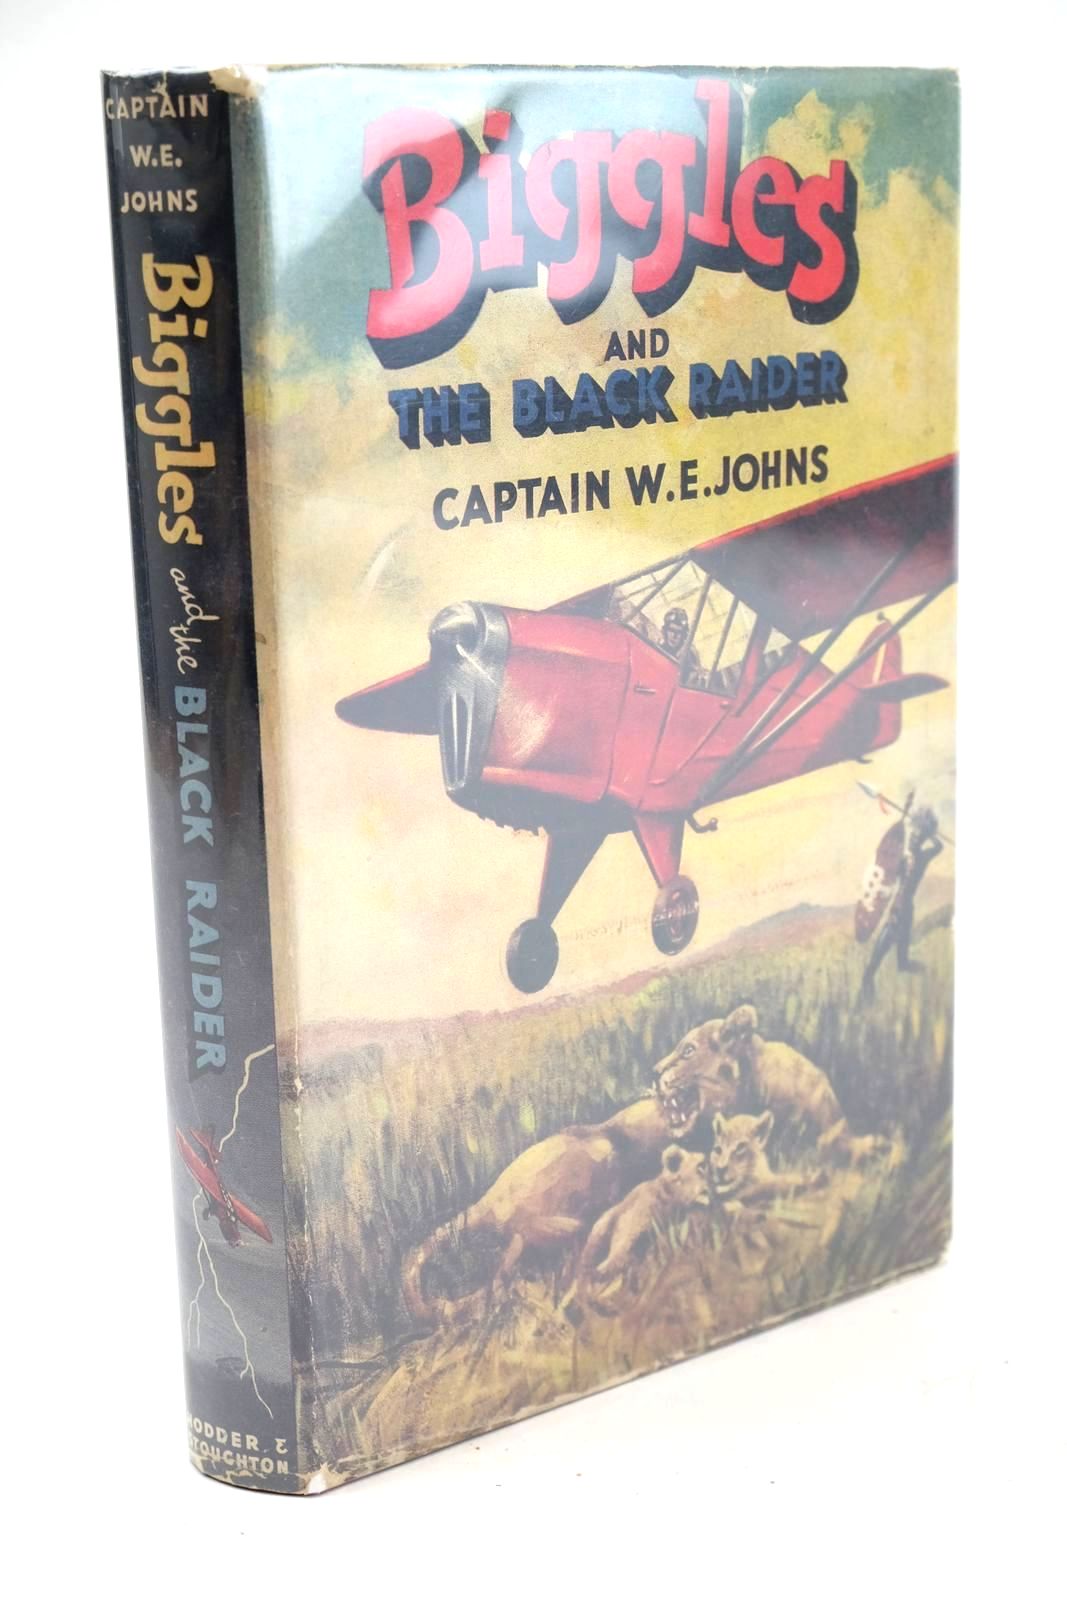 Photo of BIGGLES AND THE BLACK RAIDER written by Johns, W.E. illustrated by Stead,  published by Hodder & Stoughton (STOCK CODE: 1324104)  for sale by Stella & Rose's Books